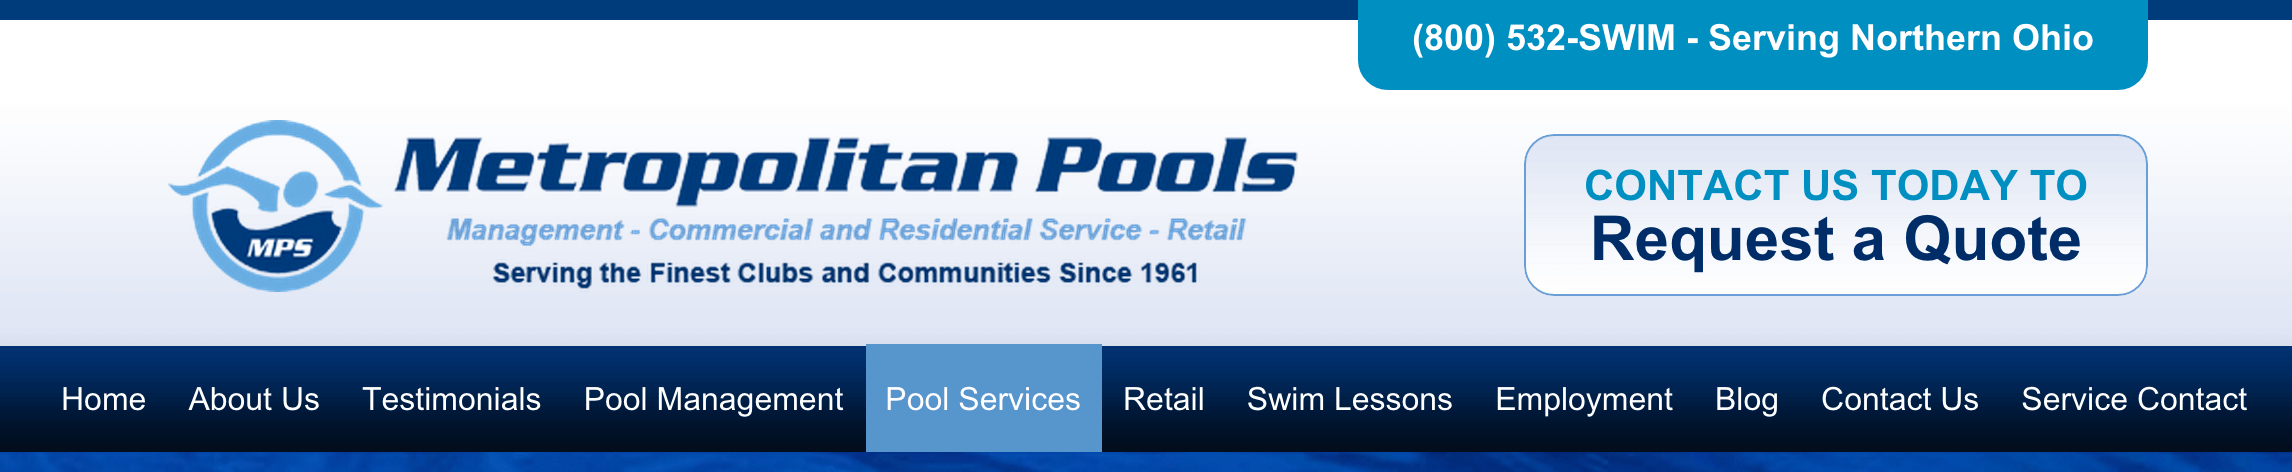 Client Profile: Metropolitan Pools | Pool Marketing Site by Small Screen Producer Digital and Inbound Marketing Agency Houston